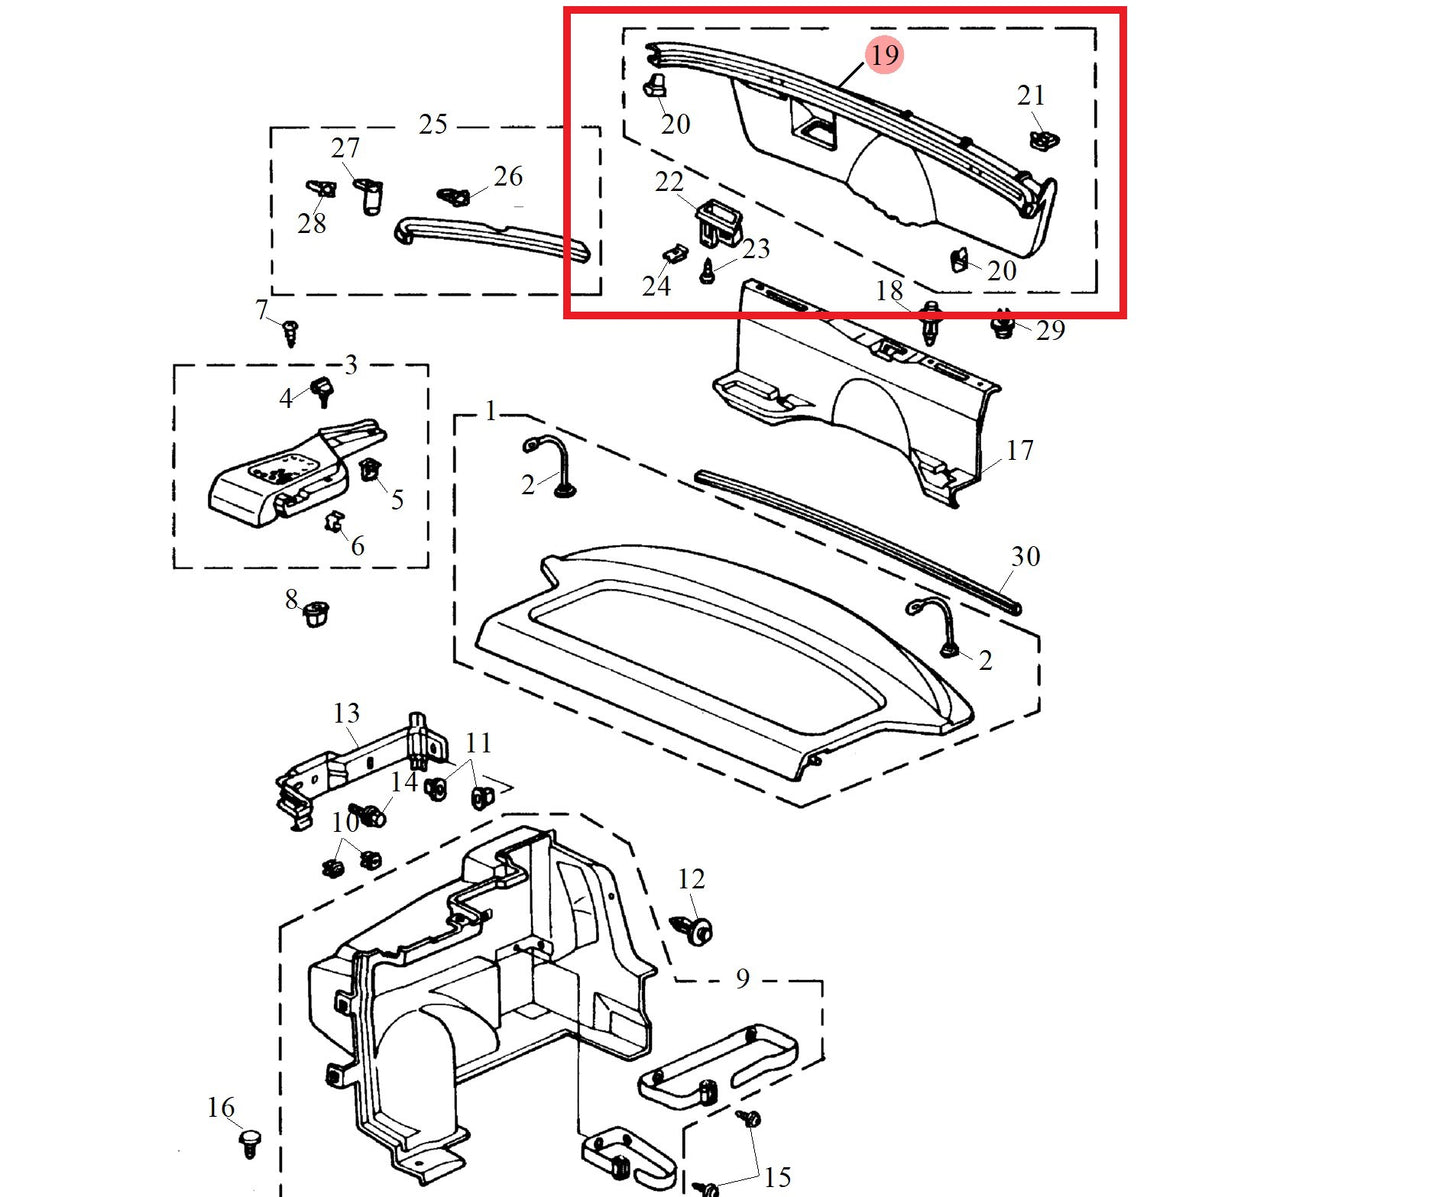 Moulding assy-tailgate lower - Stone Beige 400 Genuine MG Rover ESB100320SMJ